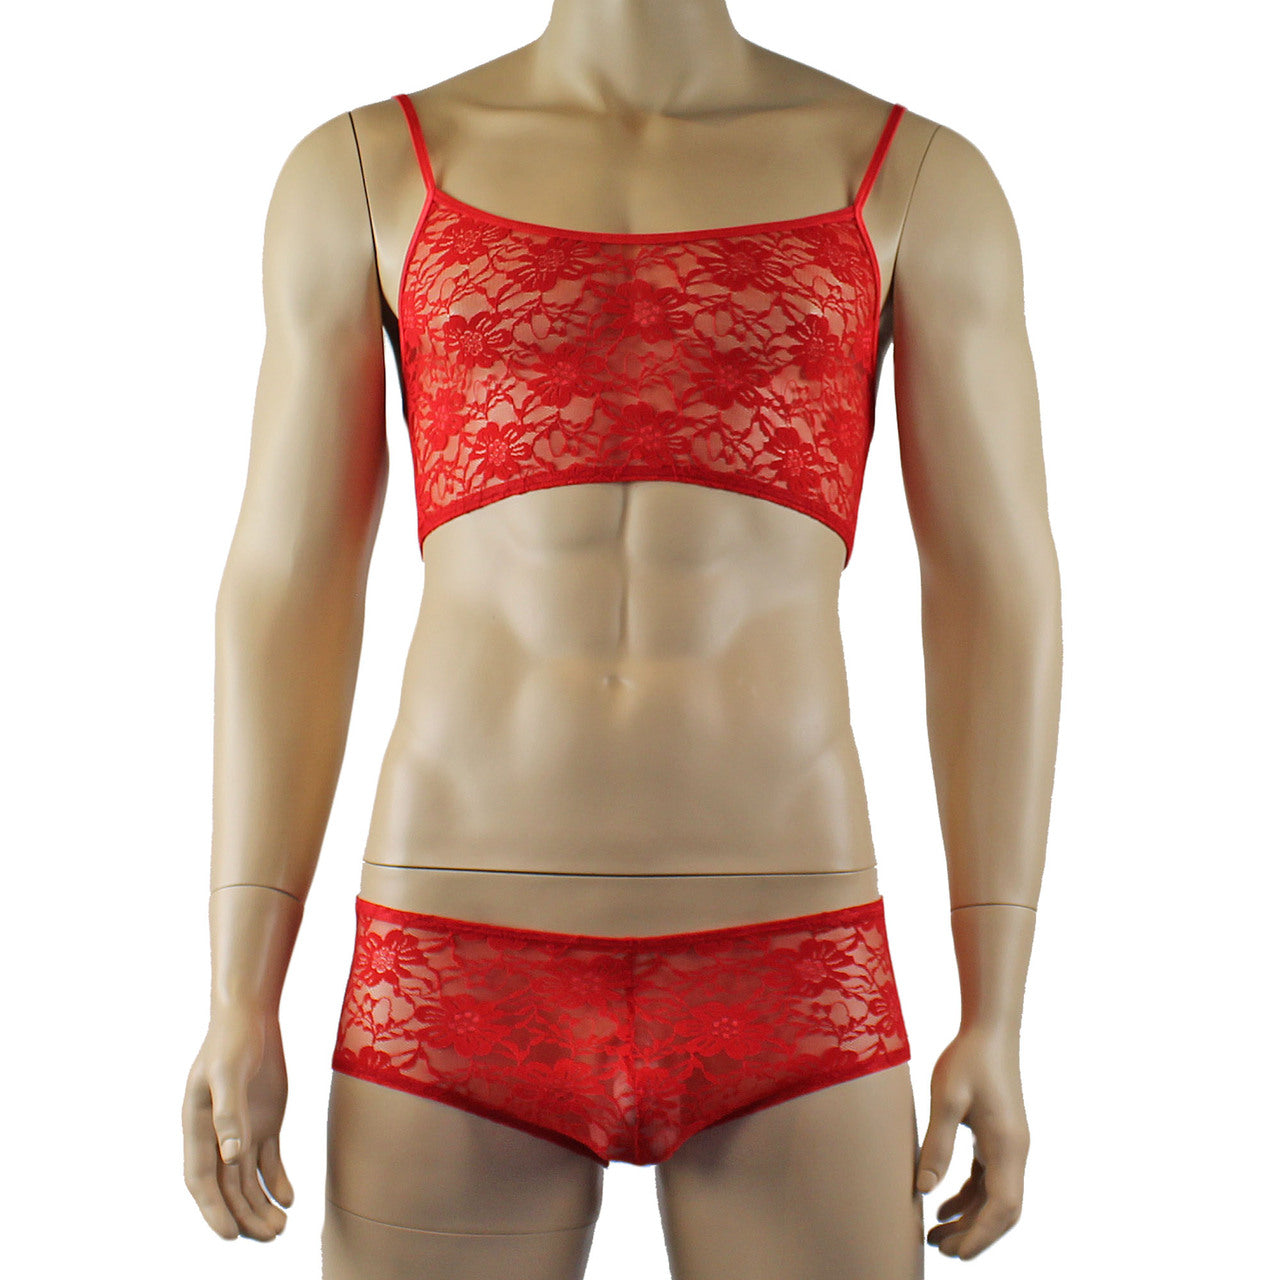 Mens Sexy Lace Crop Bra Top Camisole and Male Lingerie Panty Briefs Red